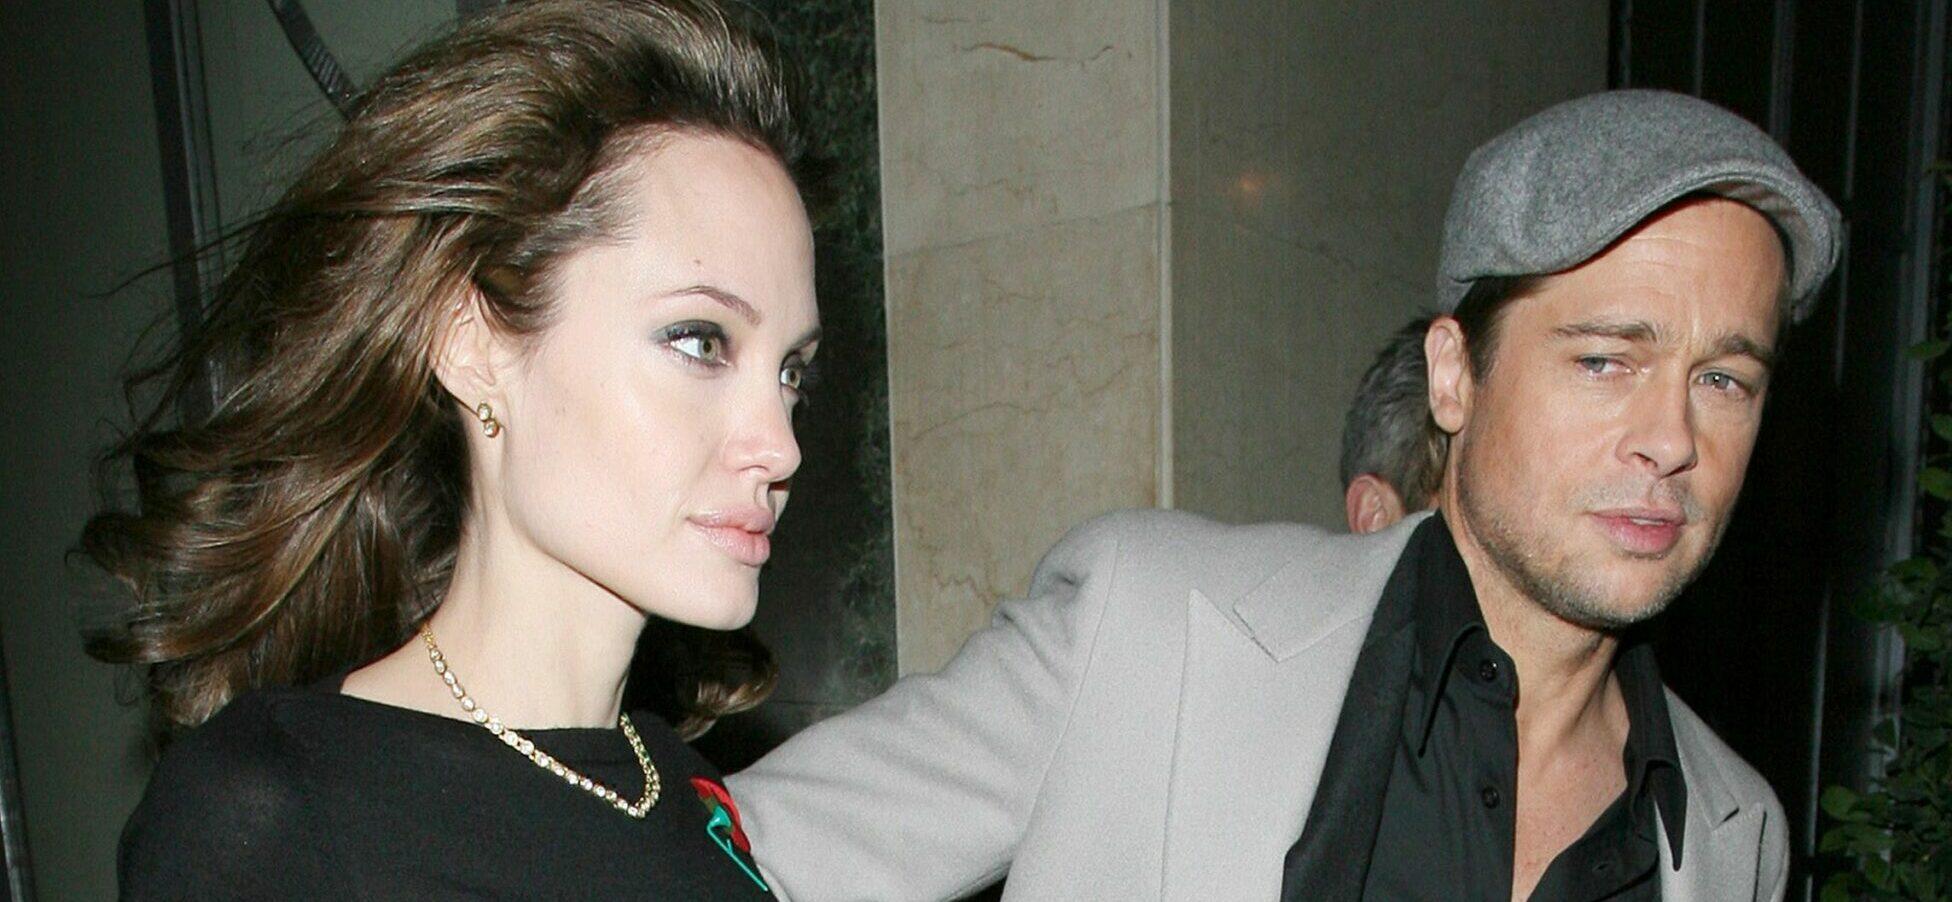 Angelina Jolie Claims Brad Pitt Threw ‘Wine And Beer’ On Children In Plane Incident